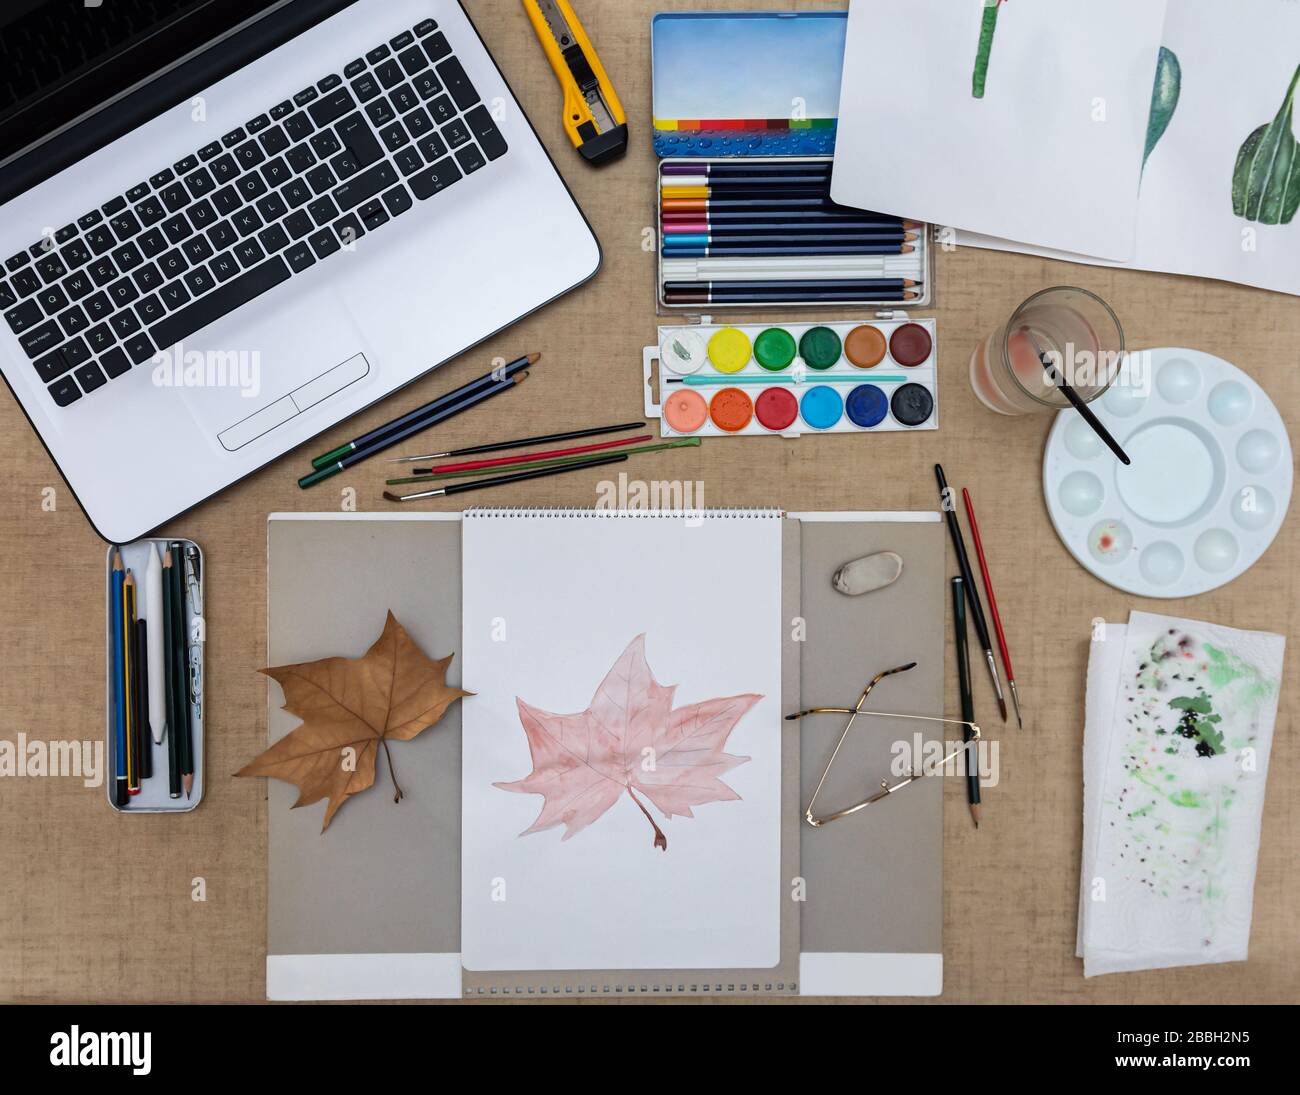 Material to paint with watercolors, copying an autumn leaf, overhead view Stock Photo